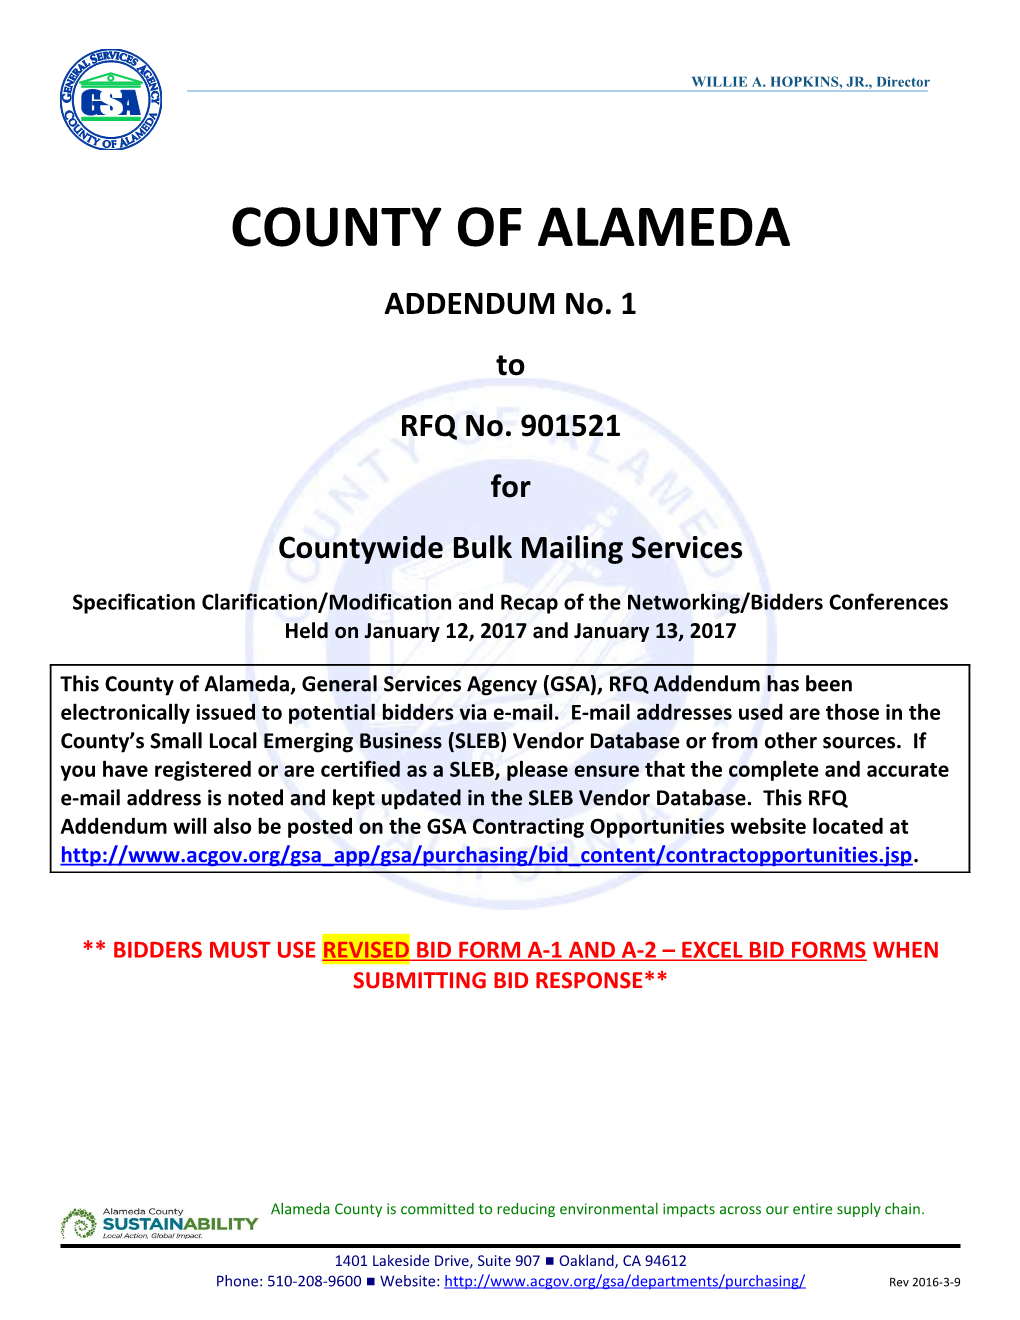 County of Alameda, General Services Agency Purchasing s4